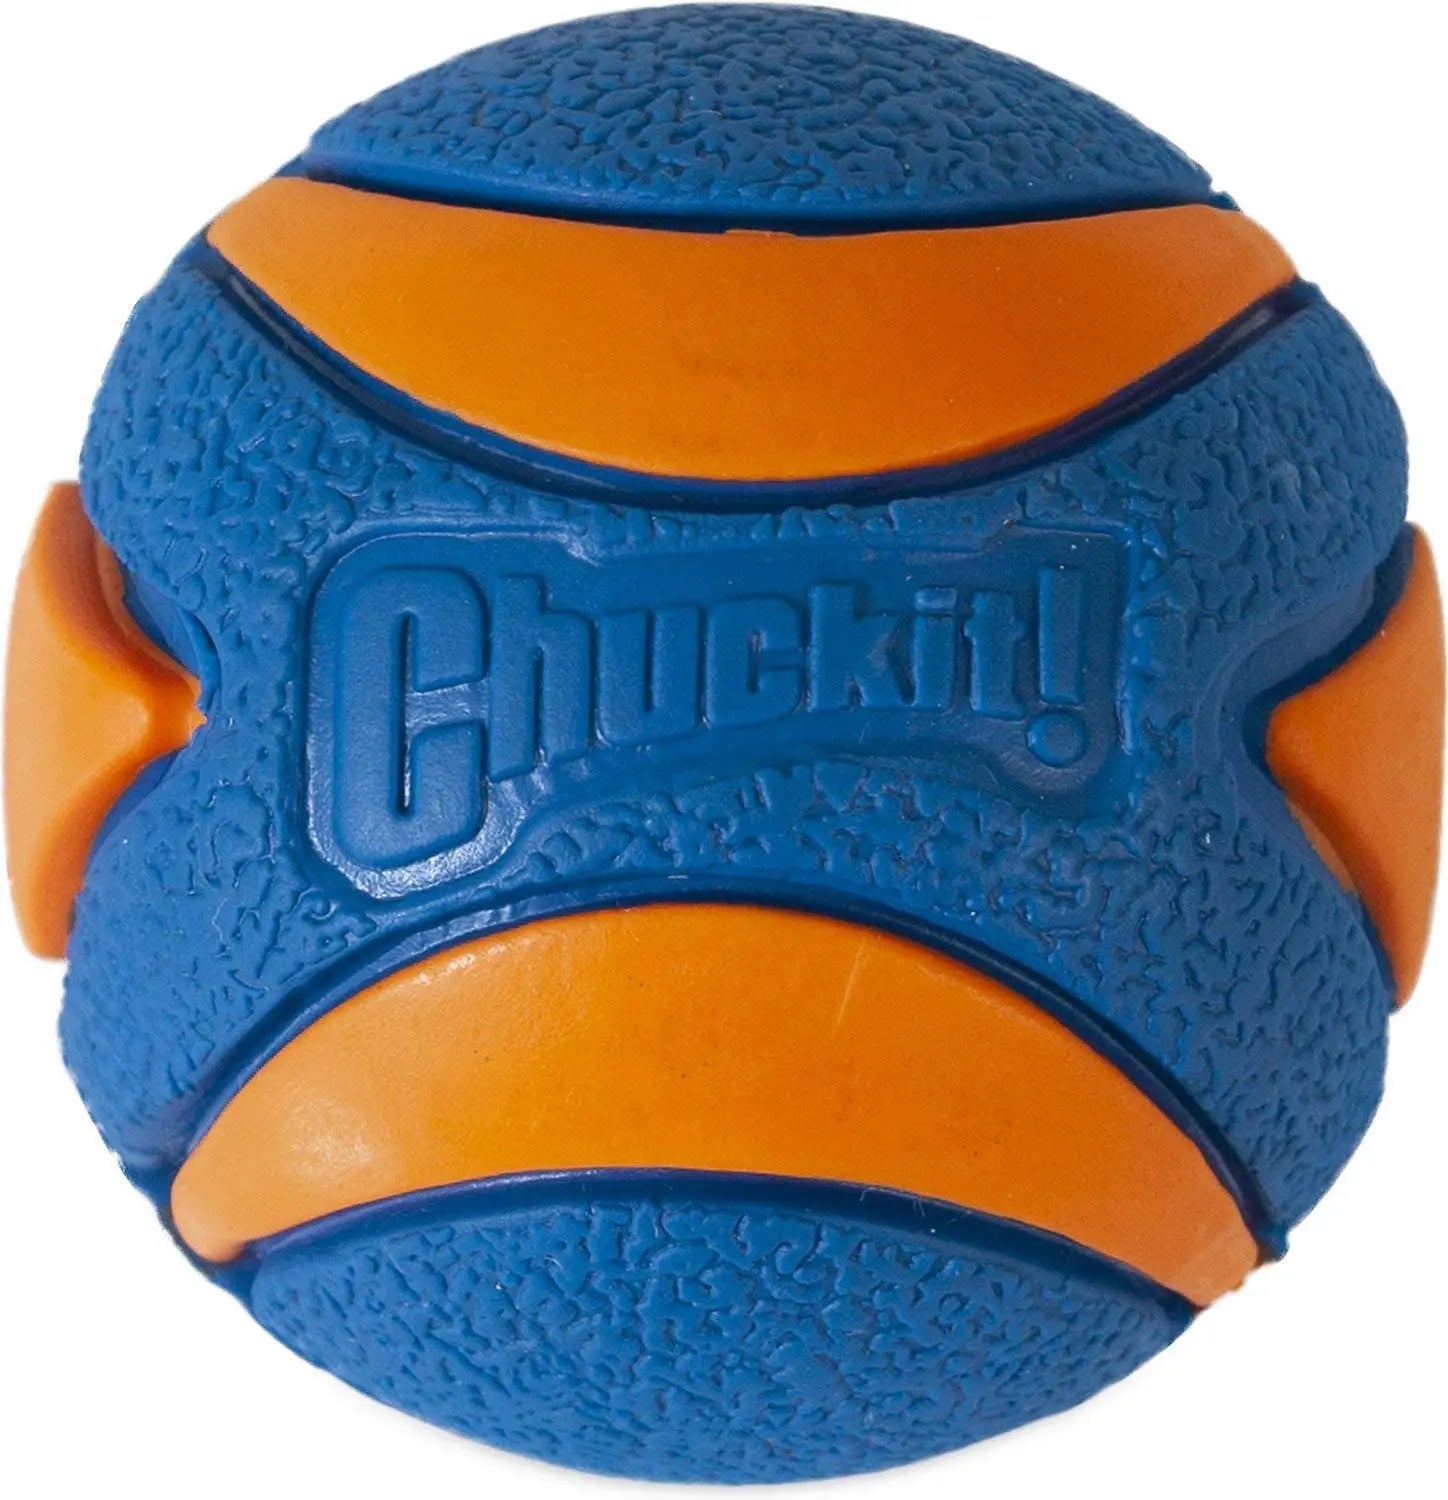 Ultra Squeaker Ball Dog Toy: Exciting, Buoyant, Durable Rubber, Textured Surface  petlums.com   